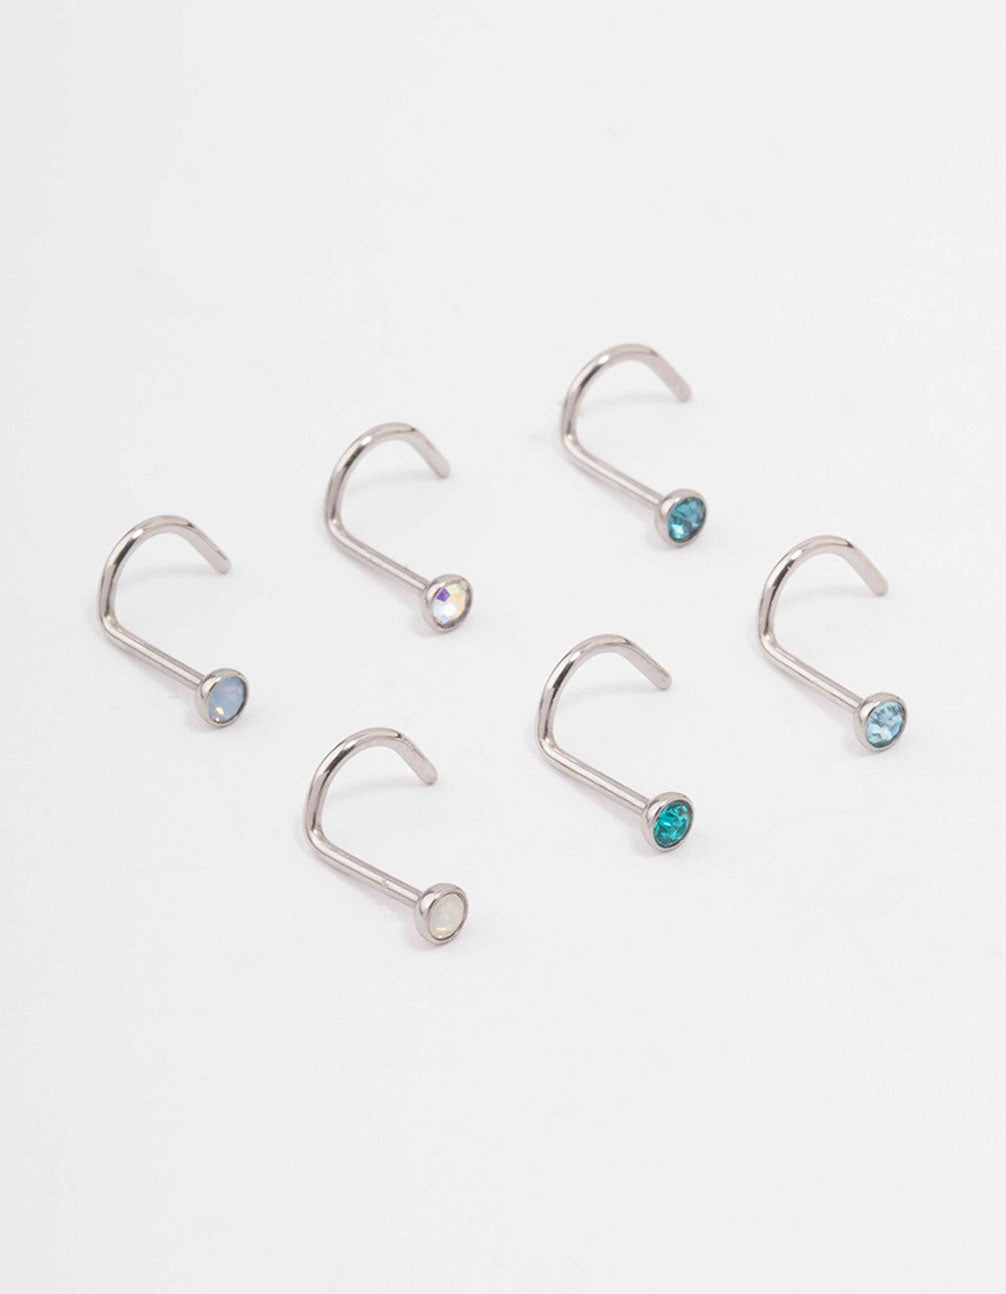 Get the Stylish Look with a Magnetic Septum Ring